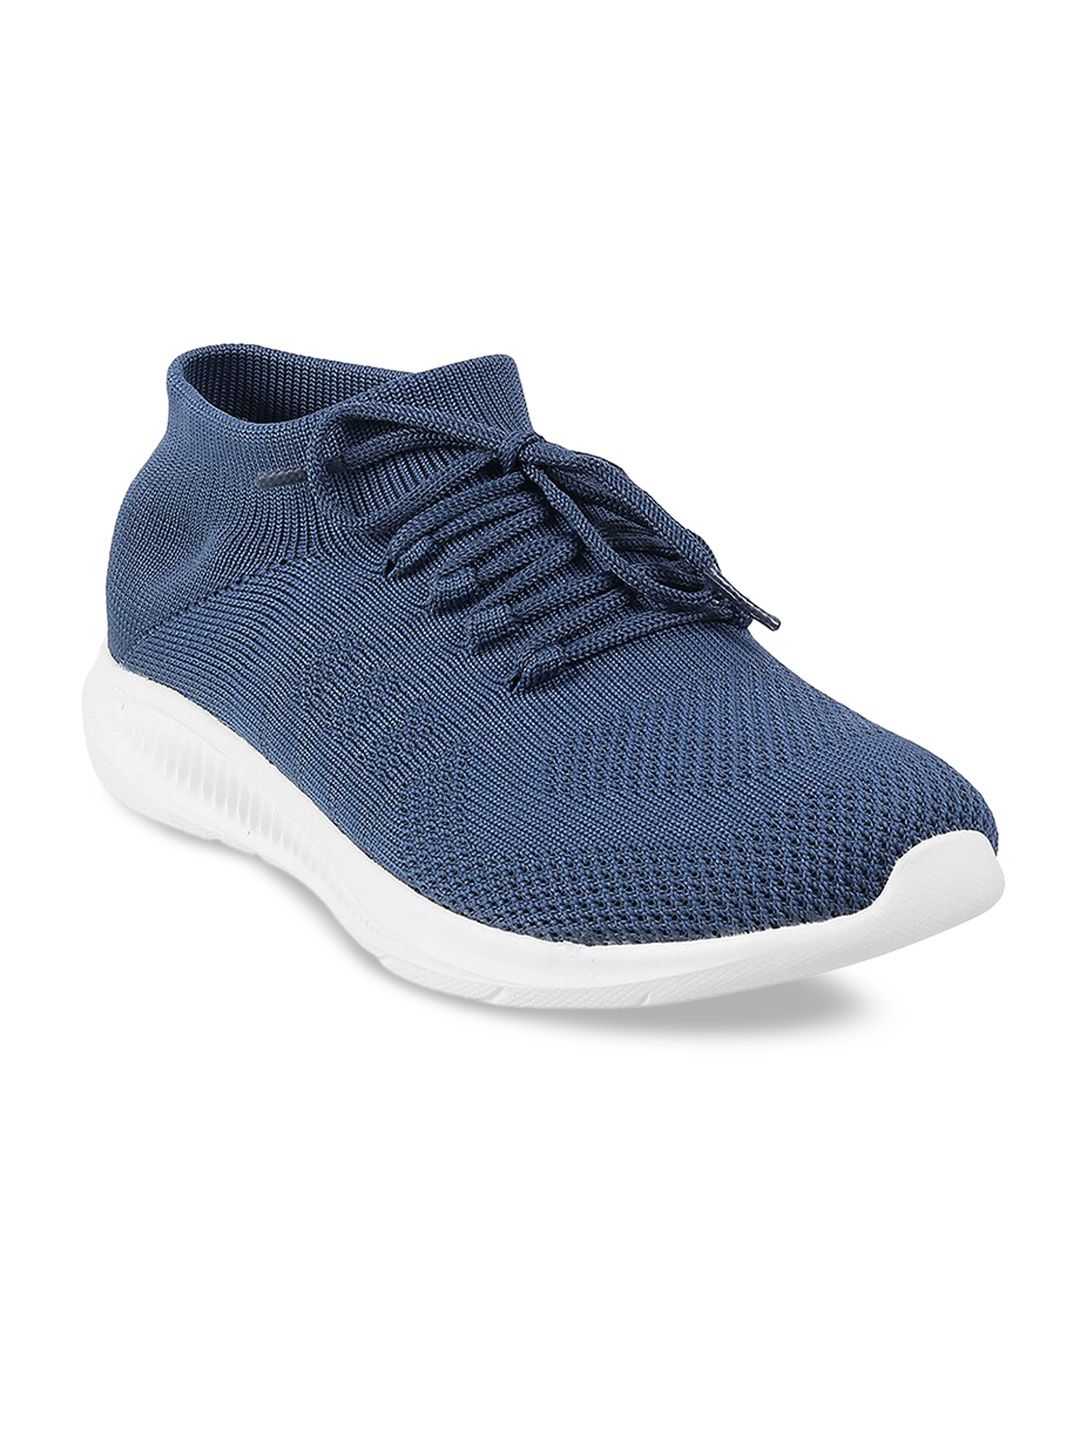 ACTIV Women Blue Woven Design Sneakers Price in India